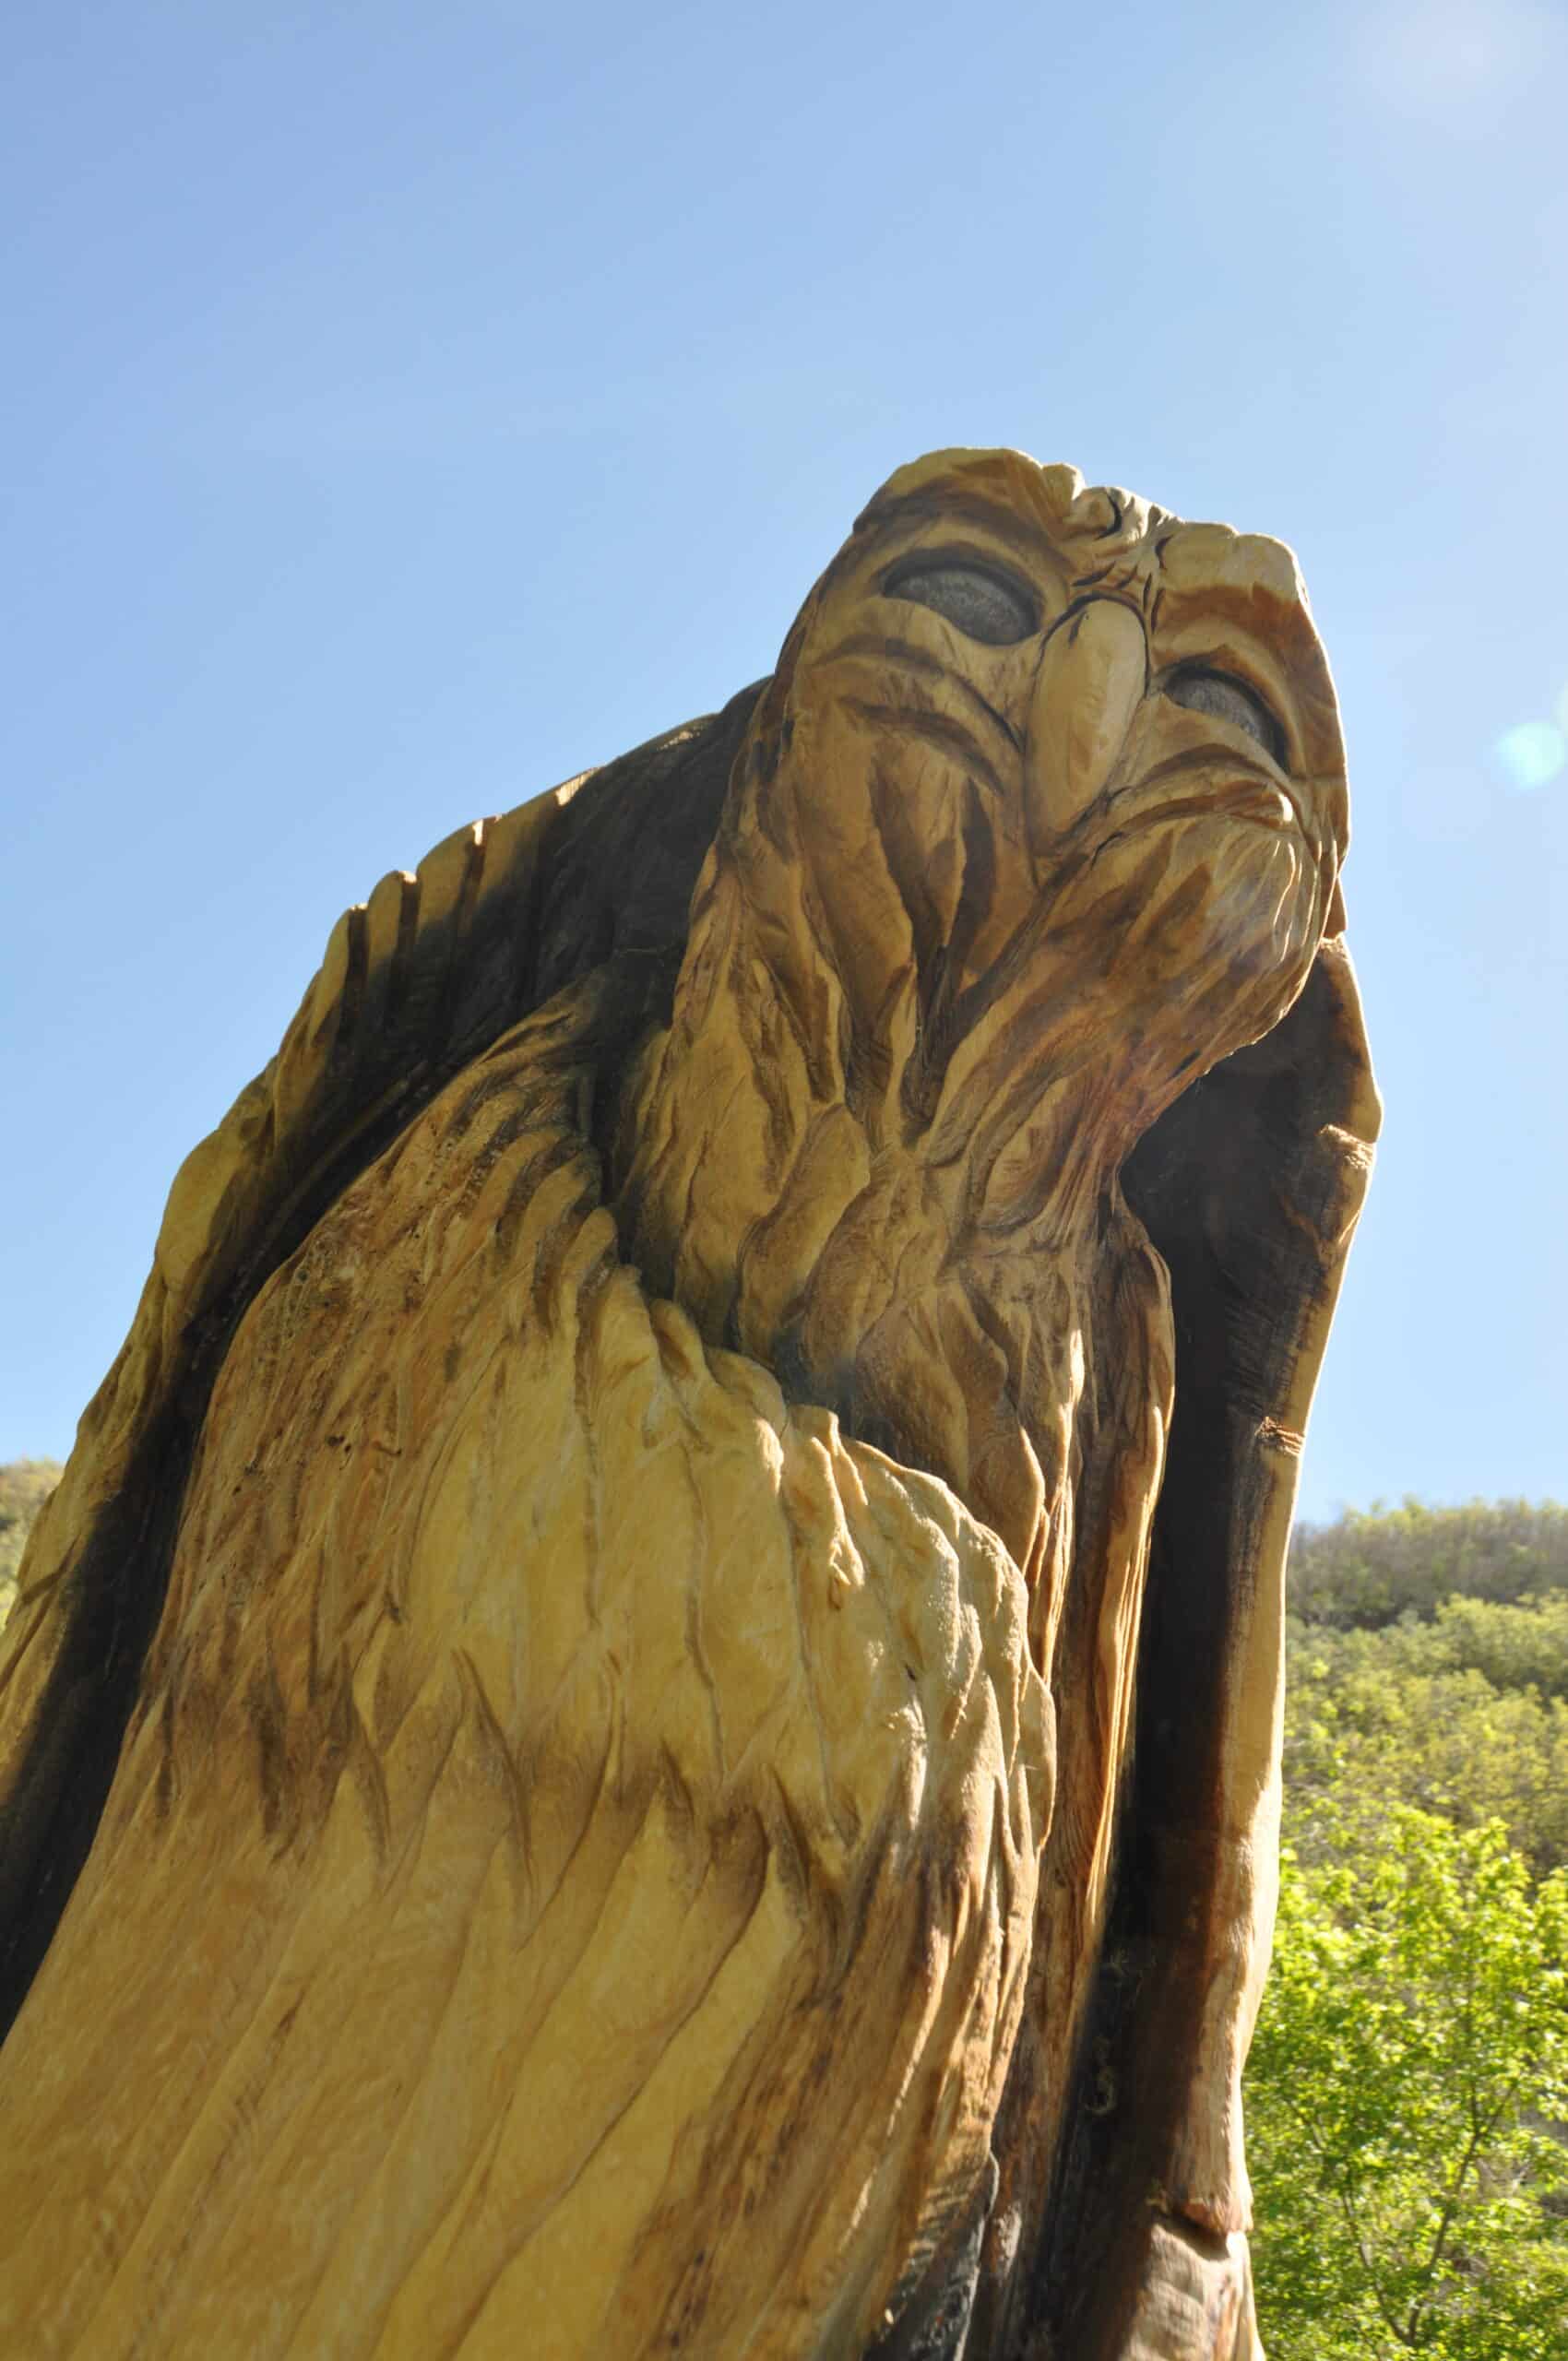 Carved wood sculpture near Rivers Edge Campground